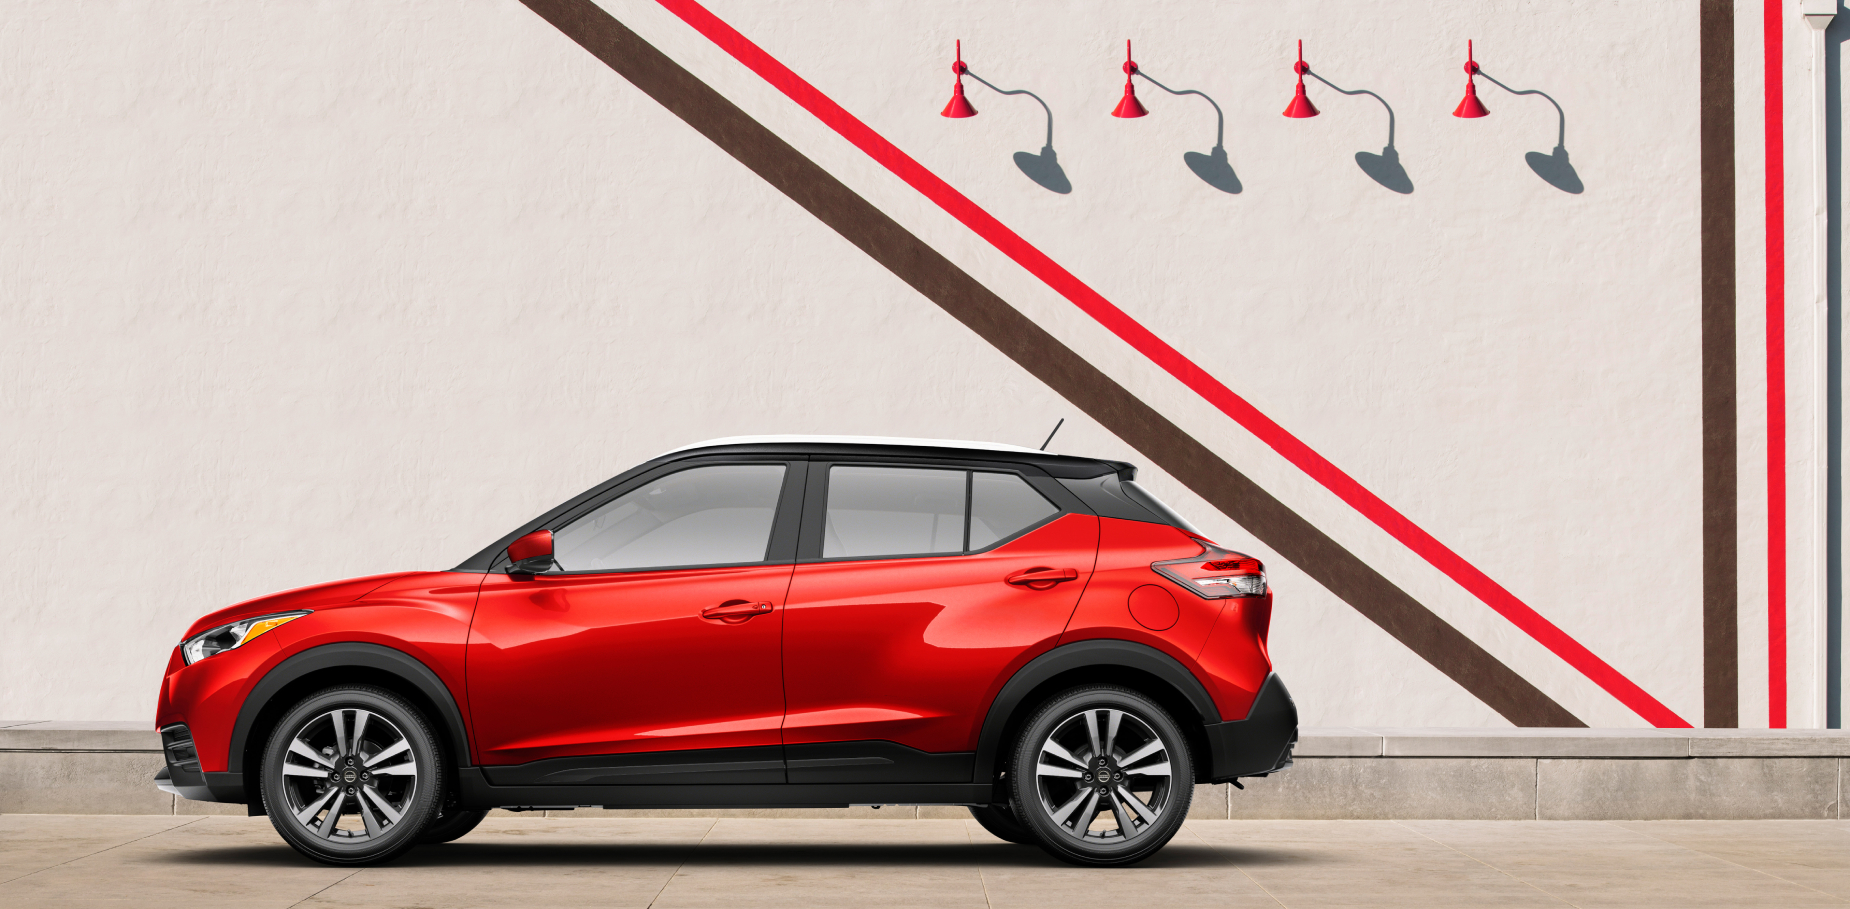 A red 2020 Nissan Kicks parked next to an artsy wall